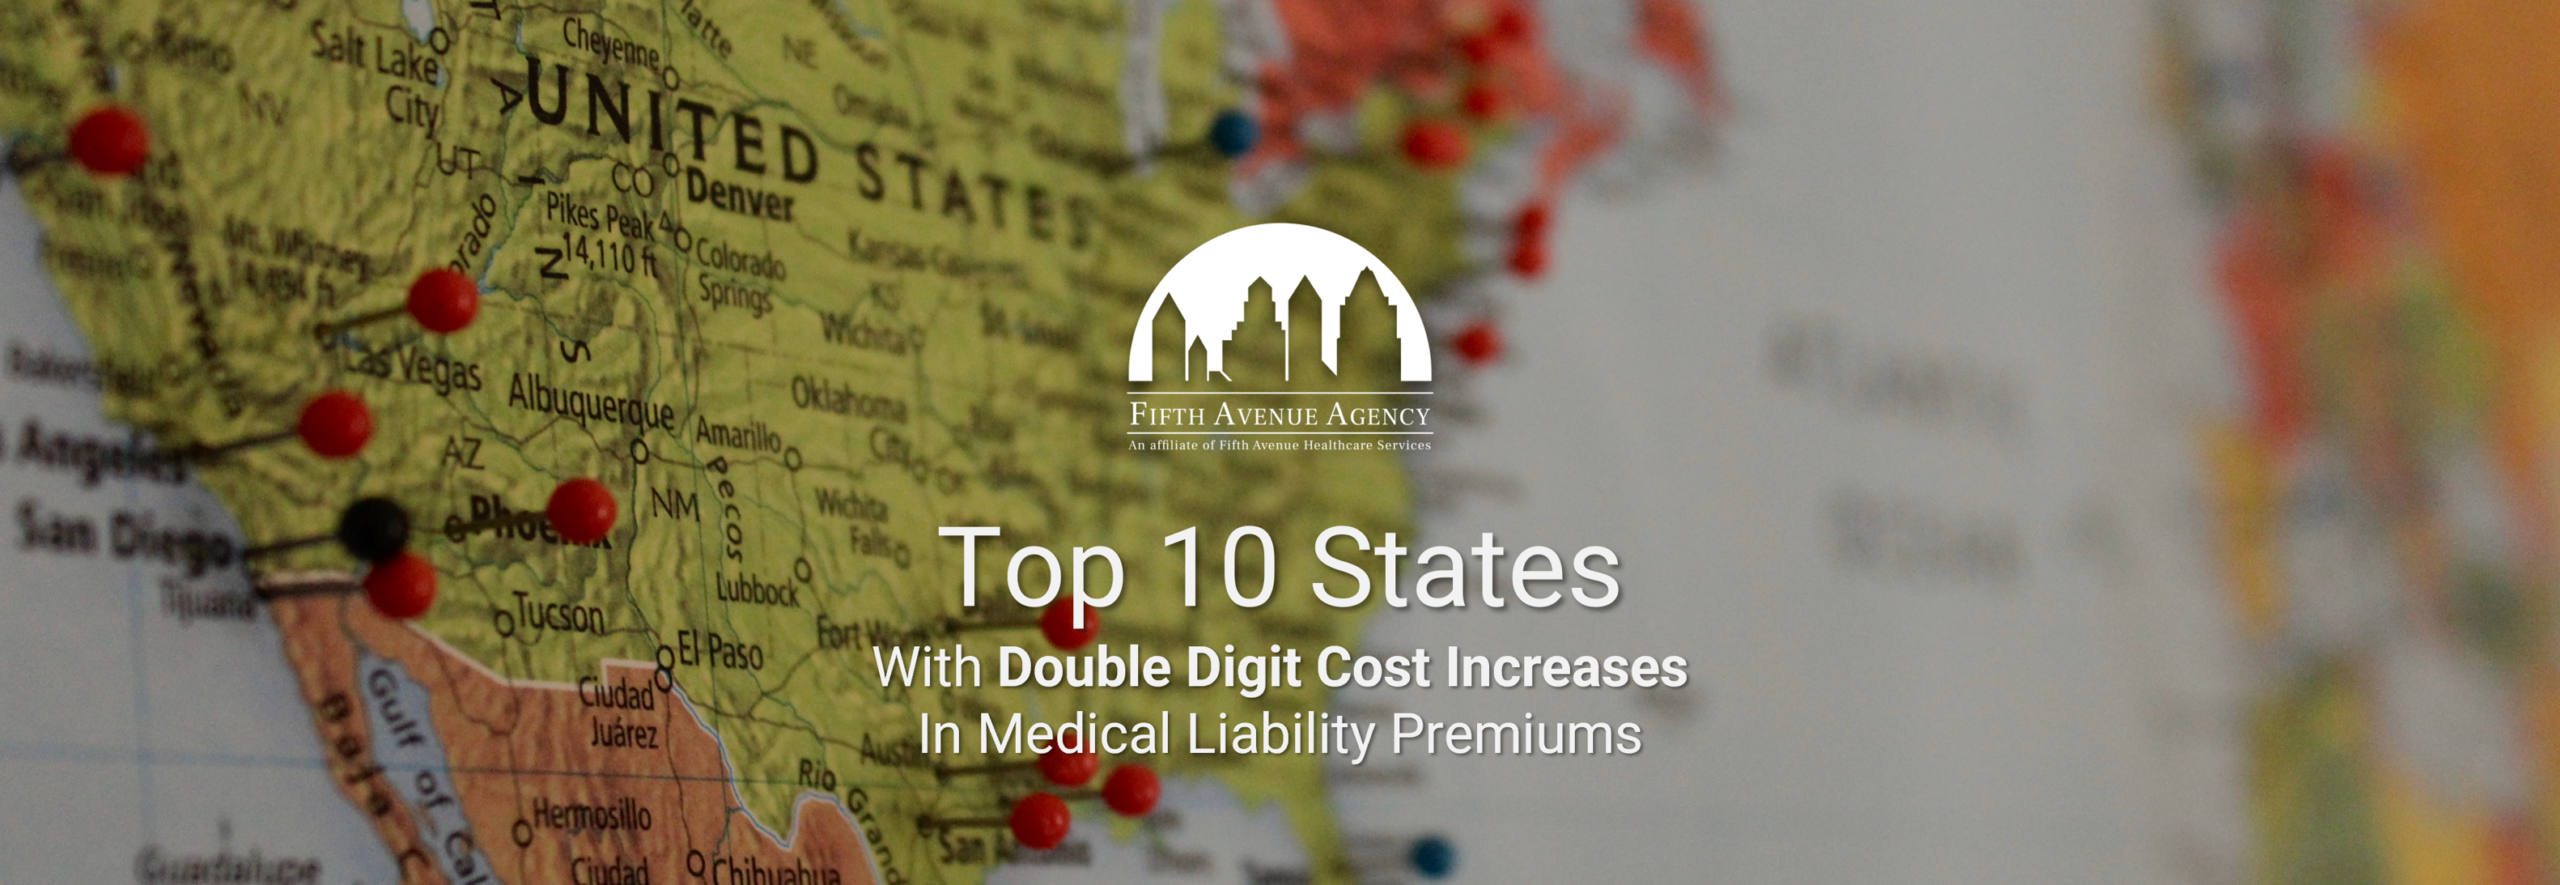 Top 10 States With Double Digit Cost Increases In Medical Liability Premiums